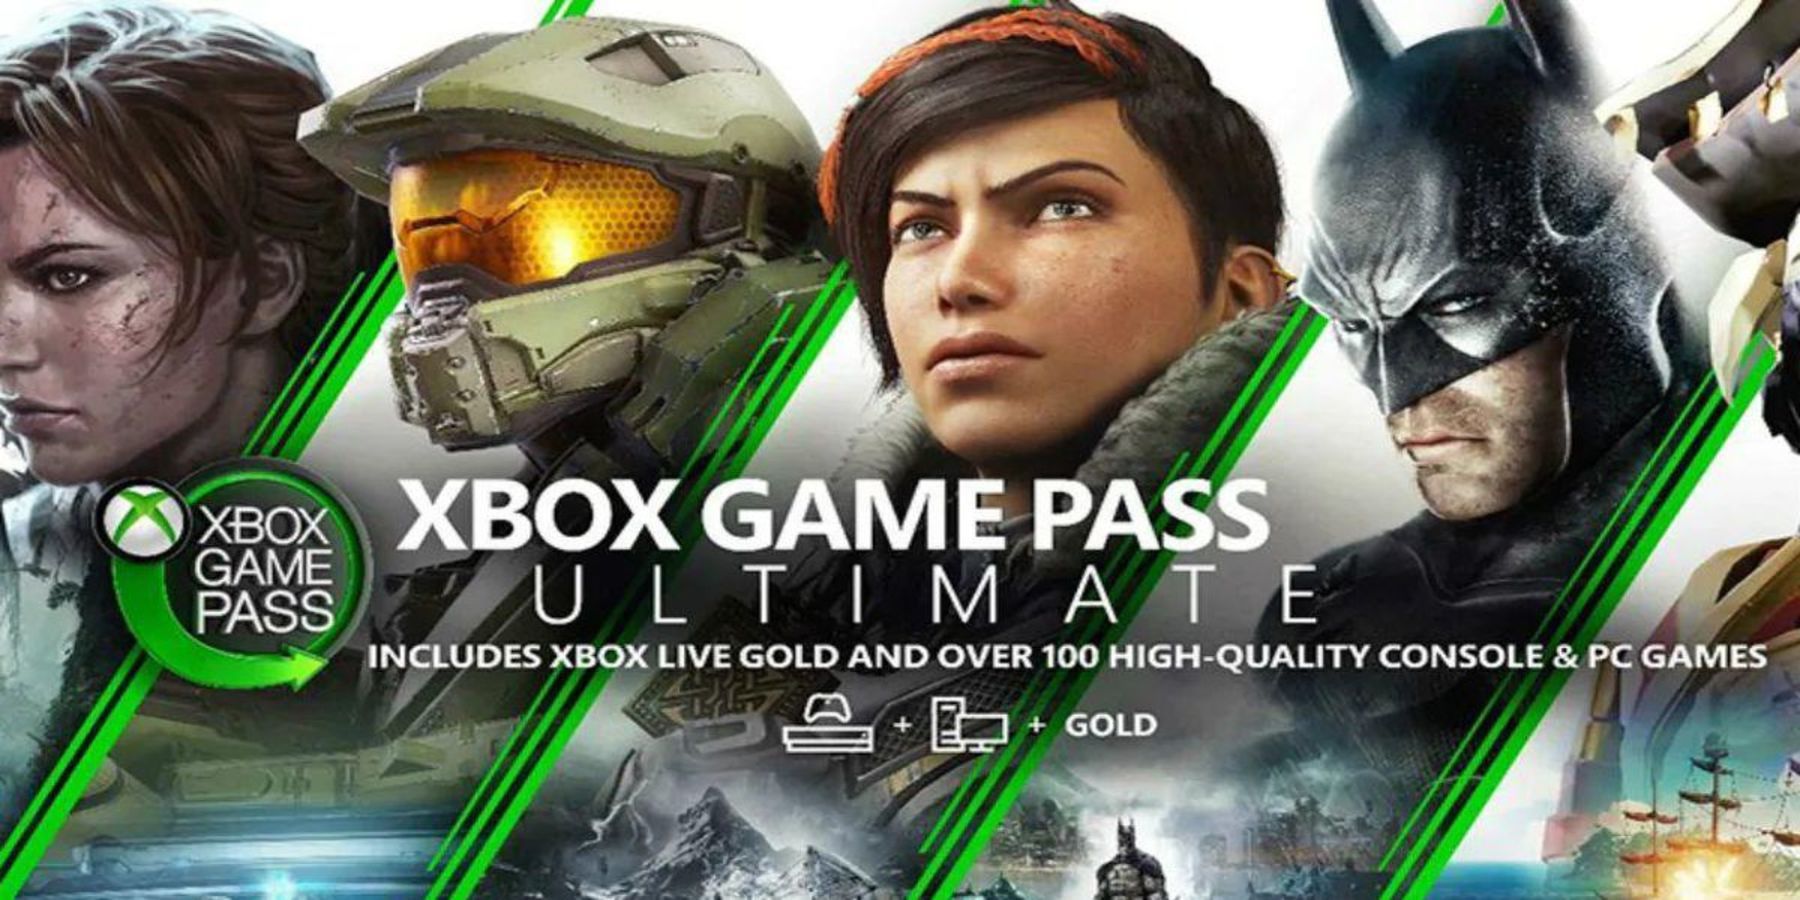 Two New Games Join Xbox Game Pass Today